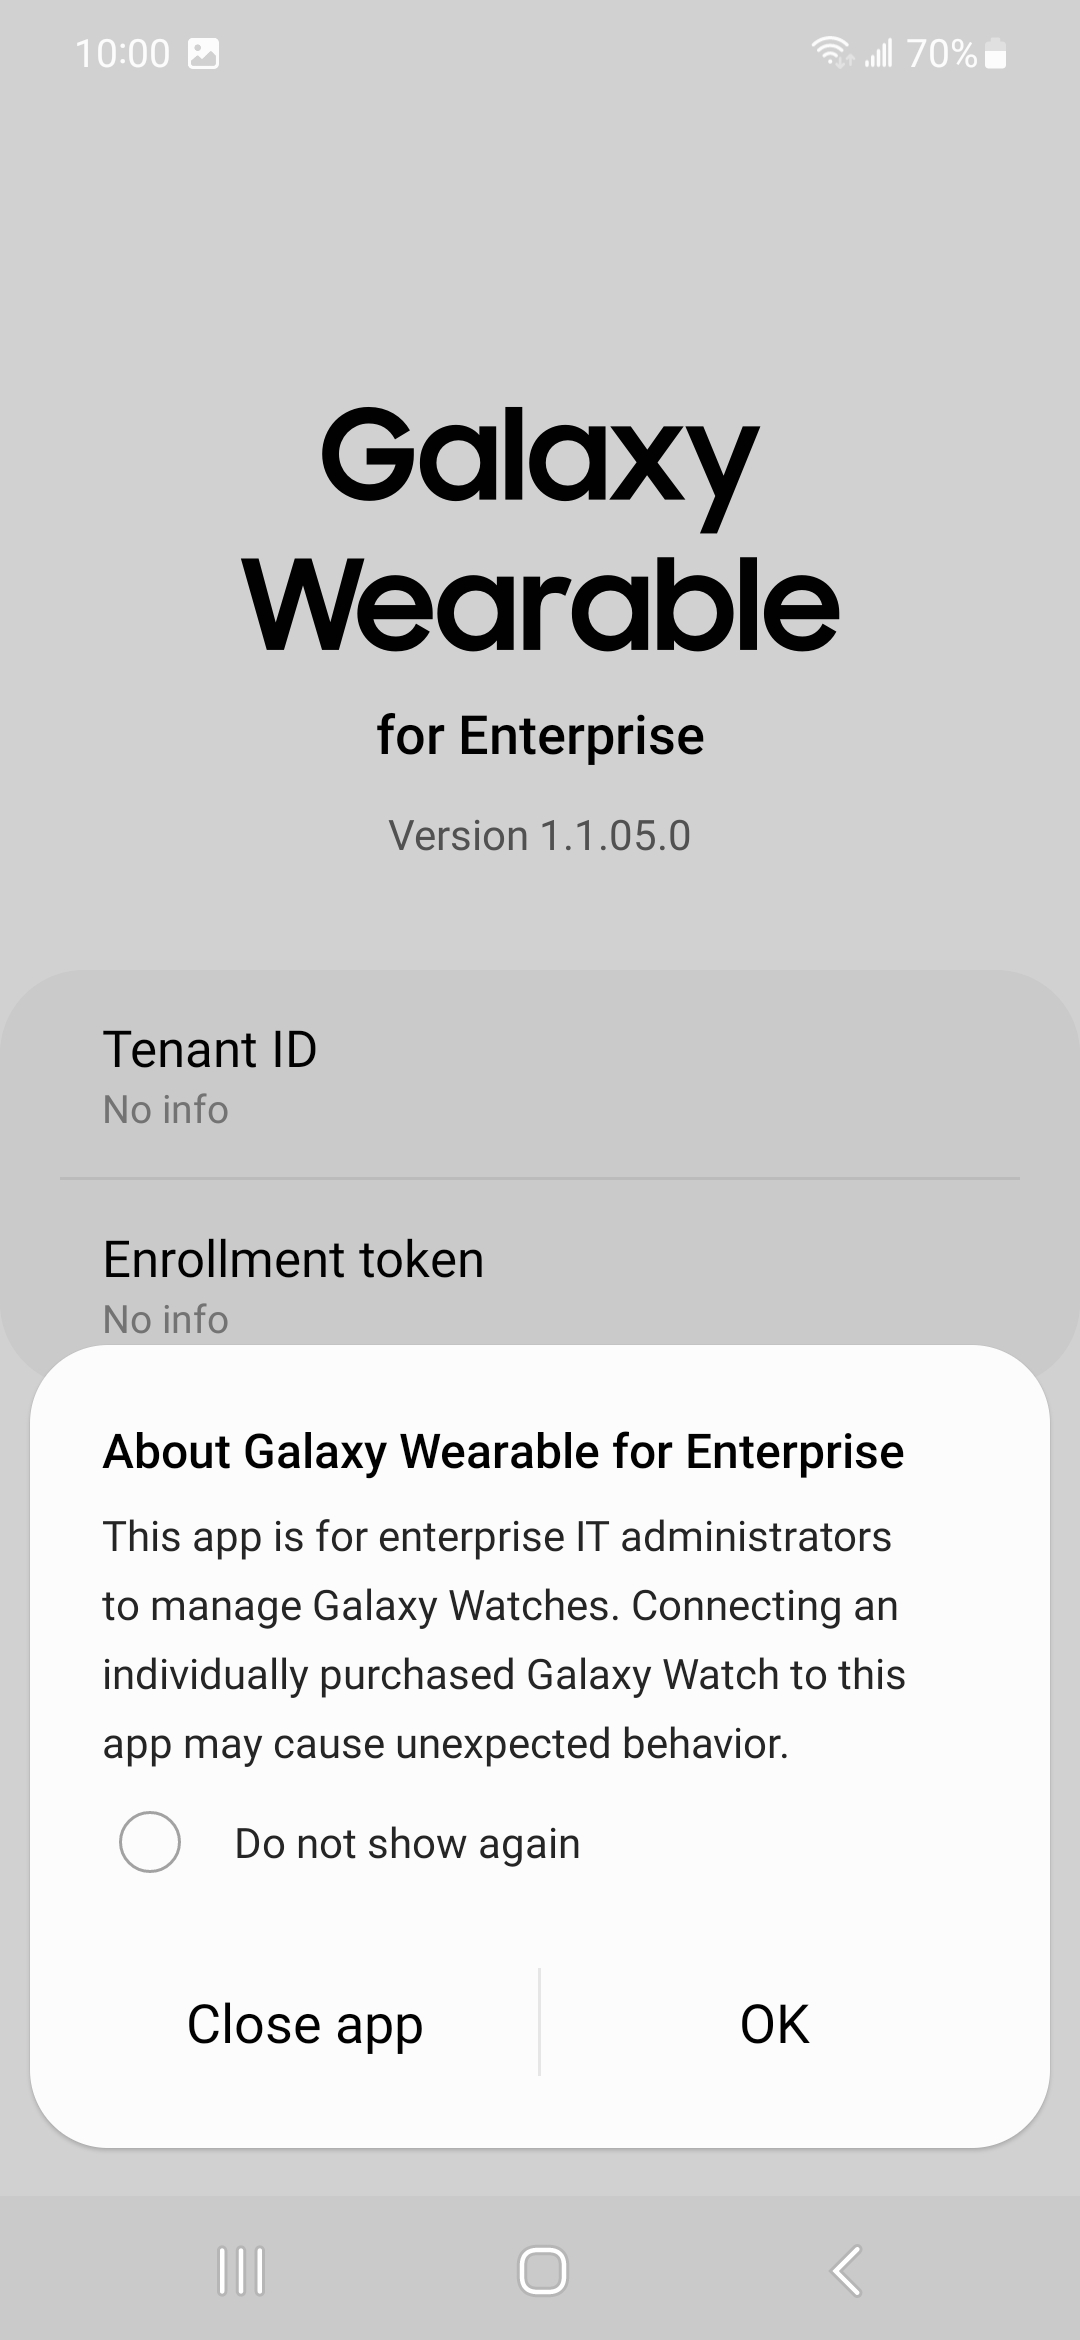 About Galaxy Wearable for Enterprise dialog